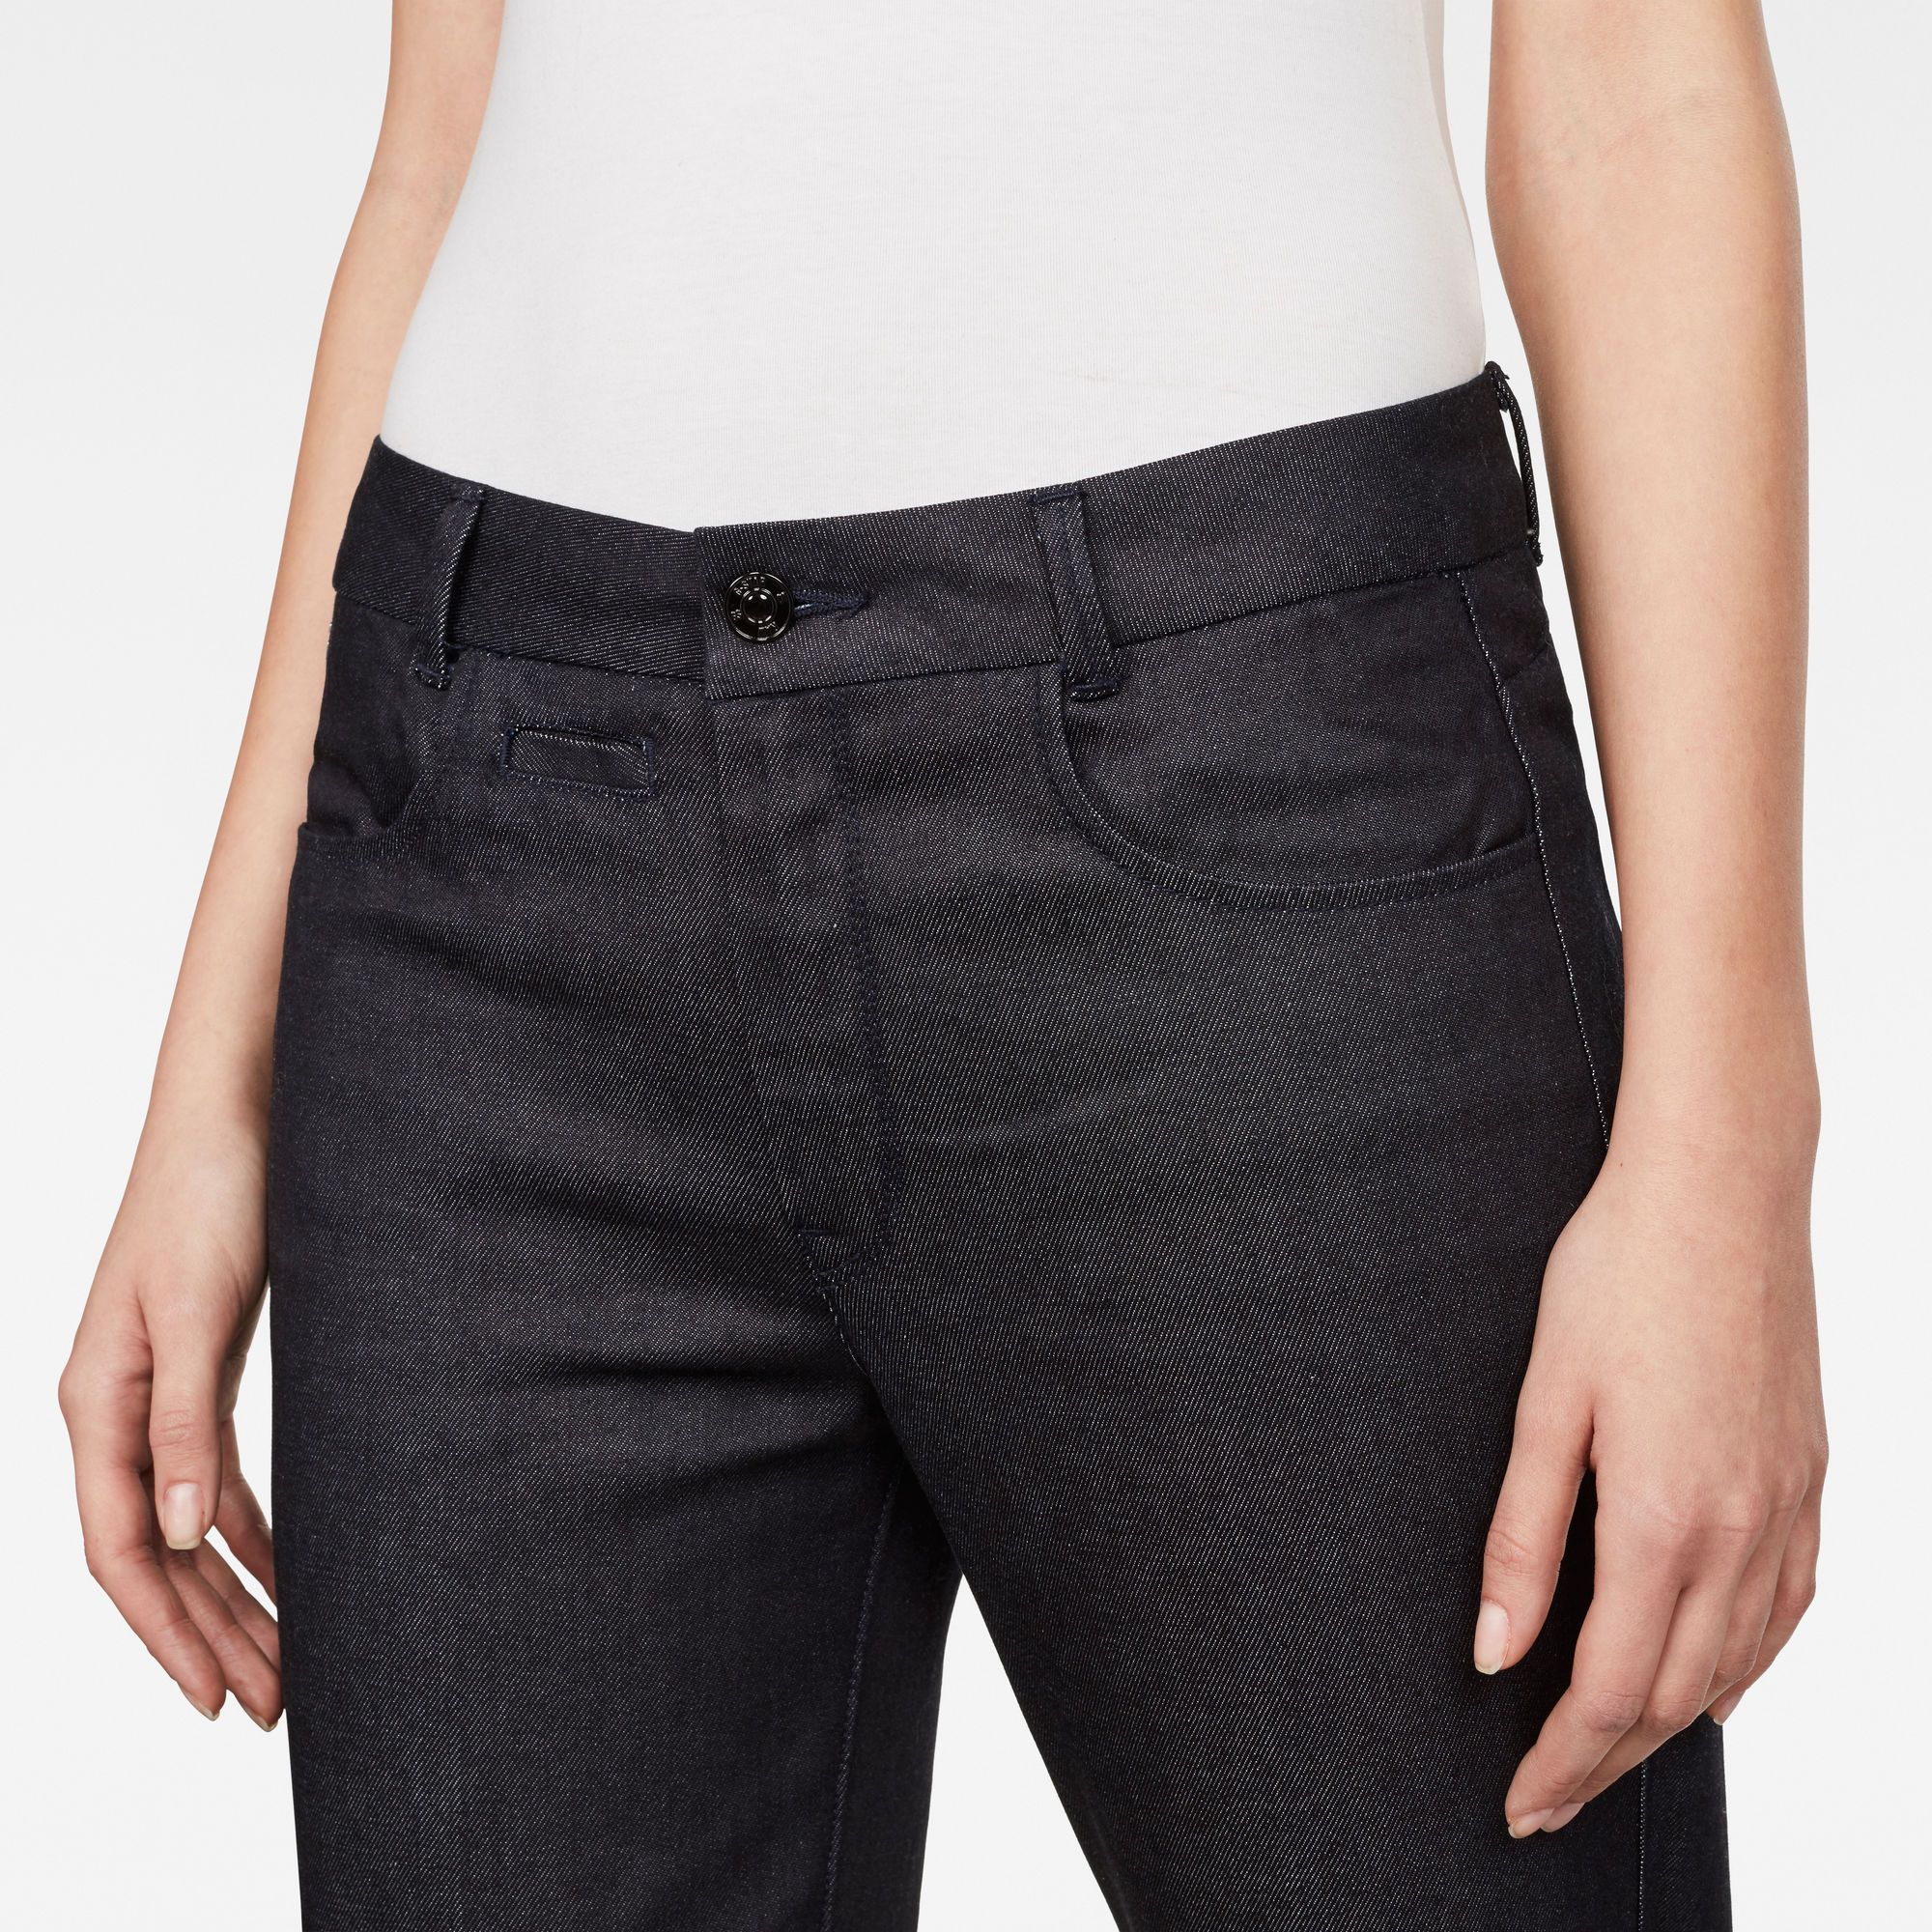 Mid waist. Regular waistband. Narrow from thigh to hem. Zip fly. Zip & button closure. Mid waist. The D-Staq Mid-Waist Skinny Ankle Chino  is cut from full-bodied denim with a surprisingly light weight. Slubby, textured denim. Super-soft hand-feel. 11-dip indigo. Skinny